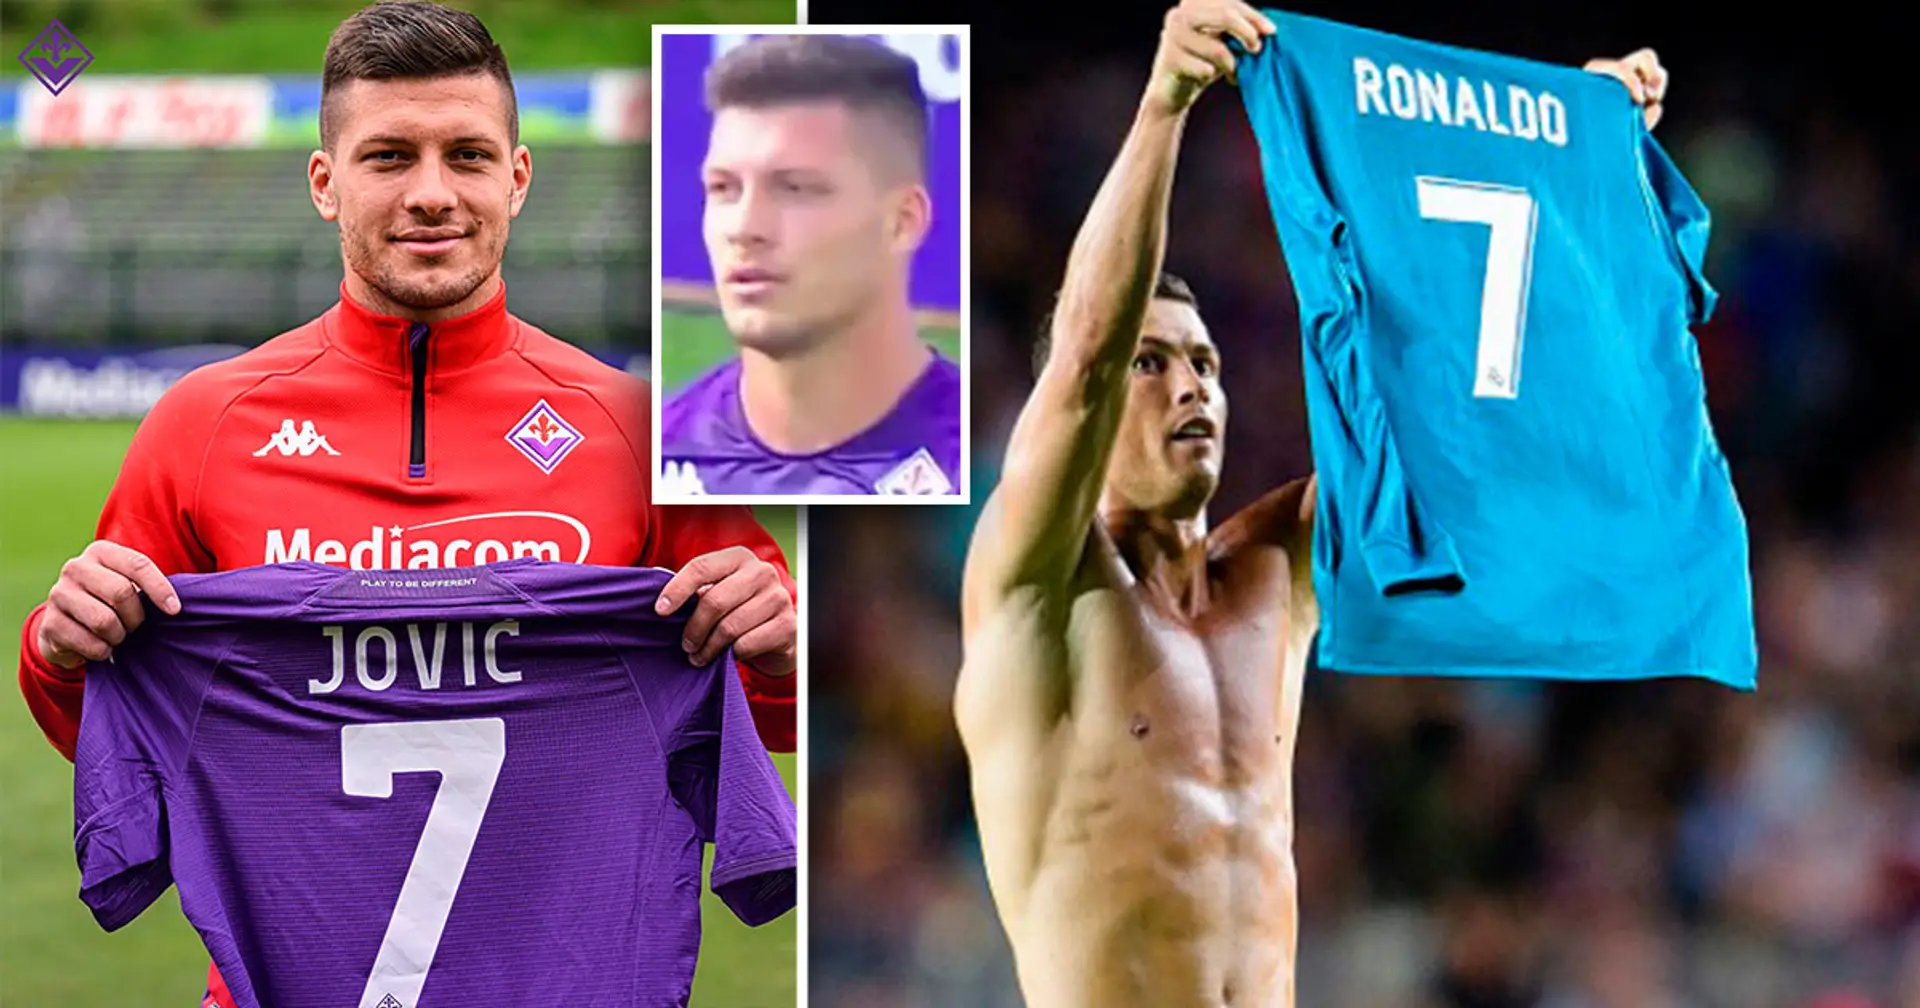 Jovic: I chose no. 7 at Fiorentina thanks to Ronaldo, the greatest player of all time